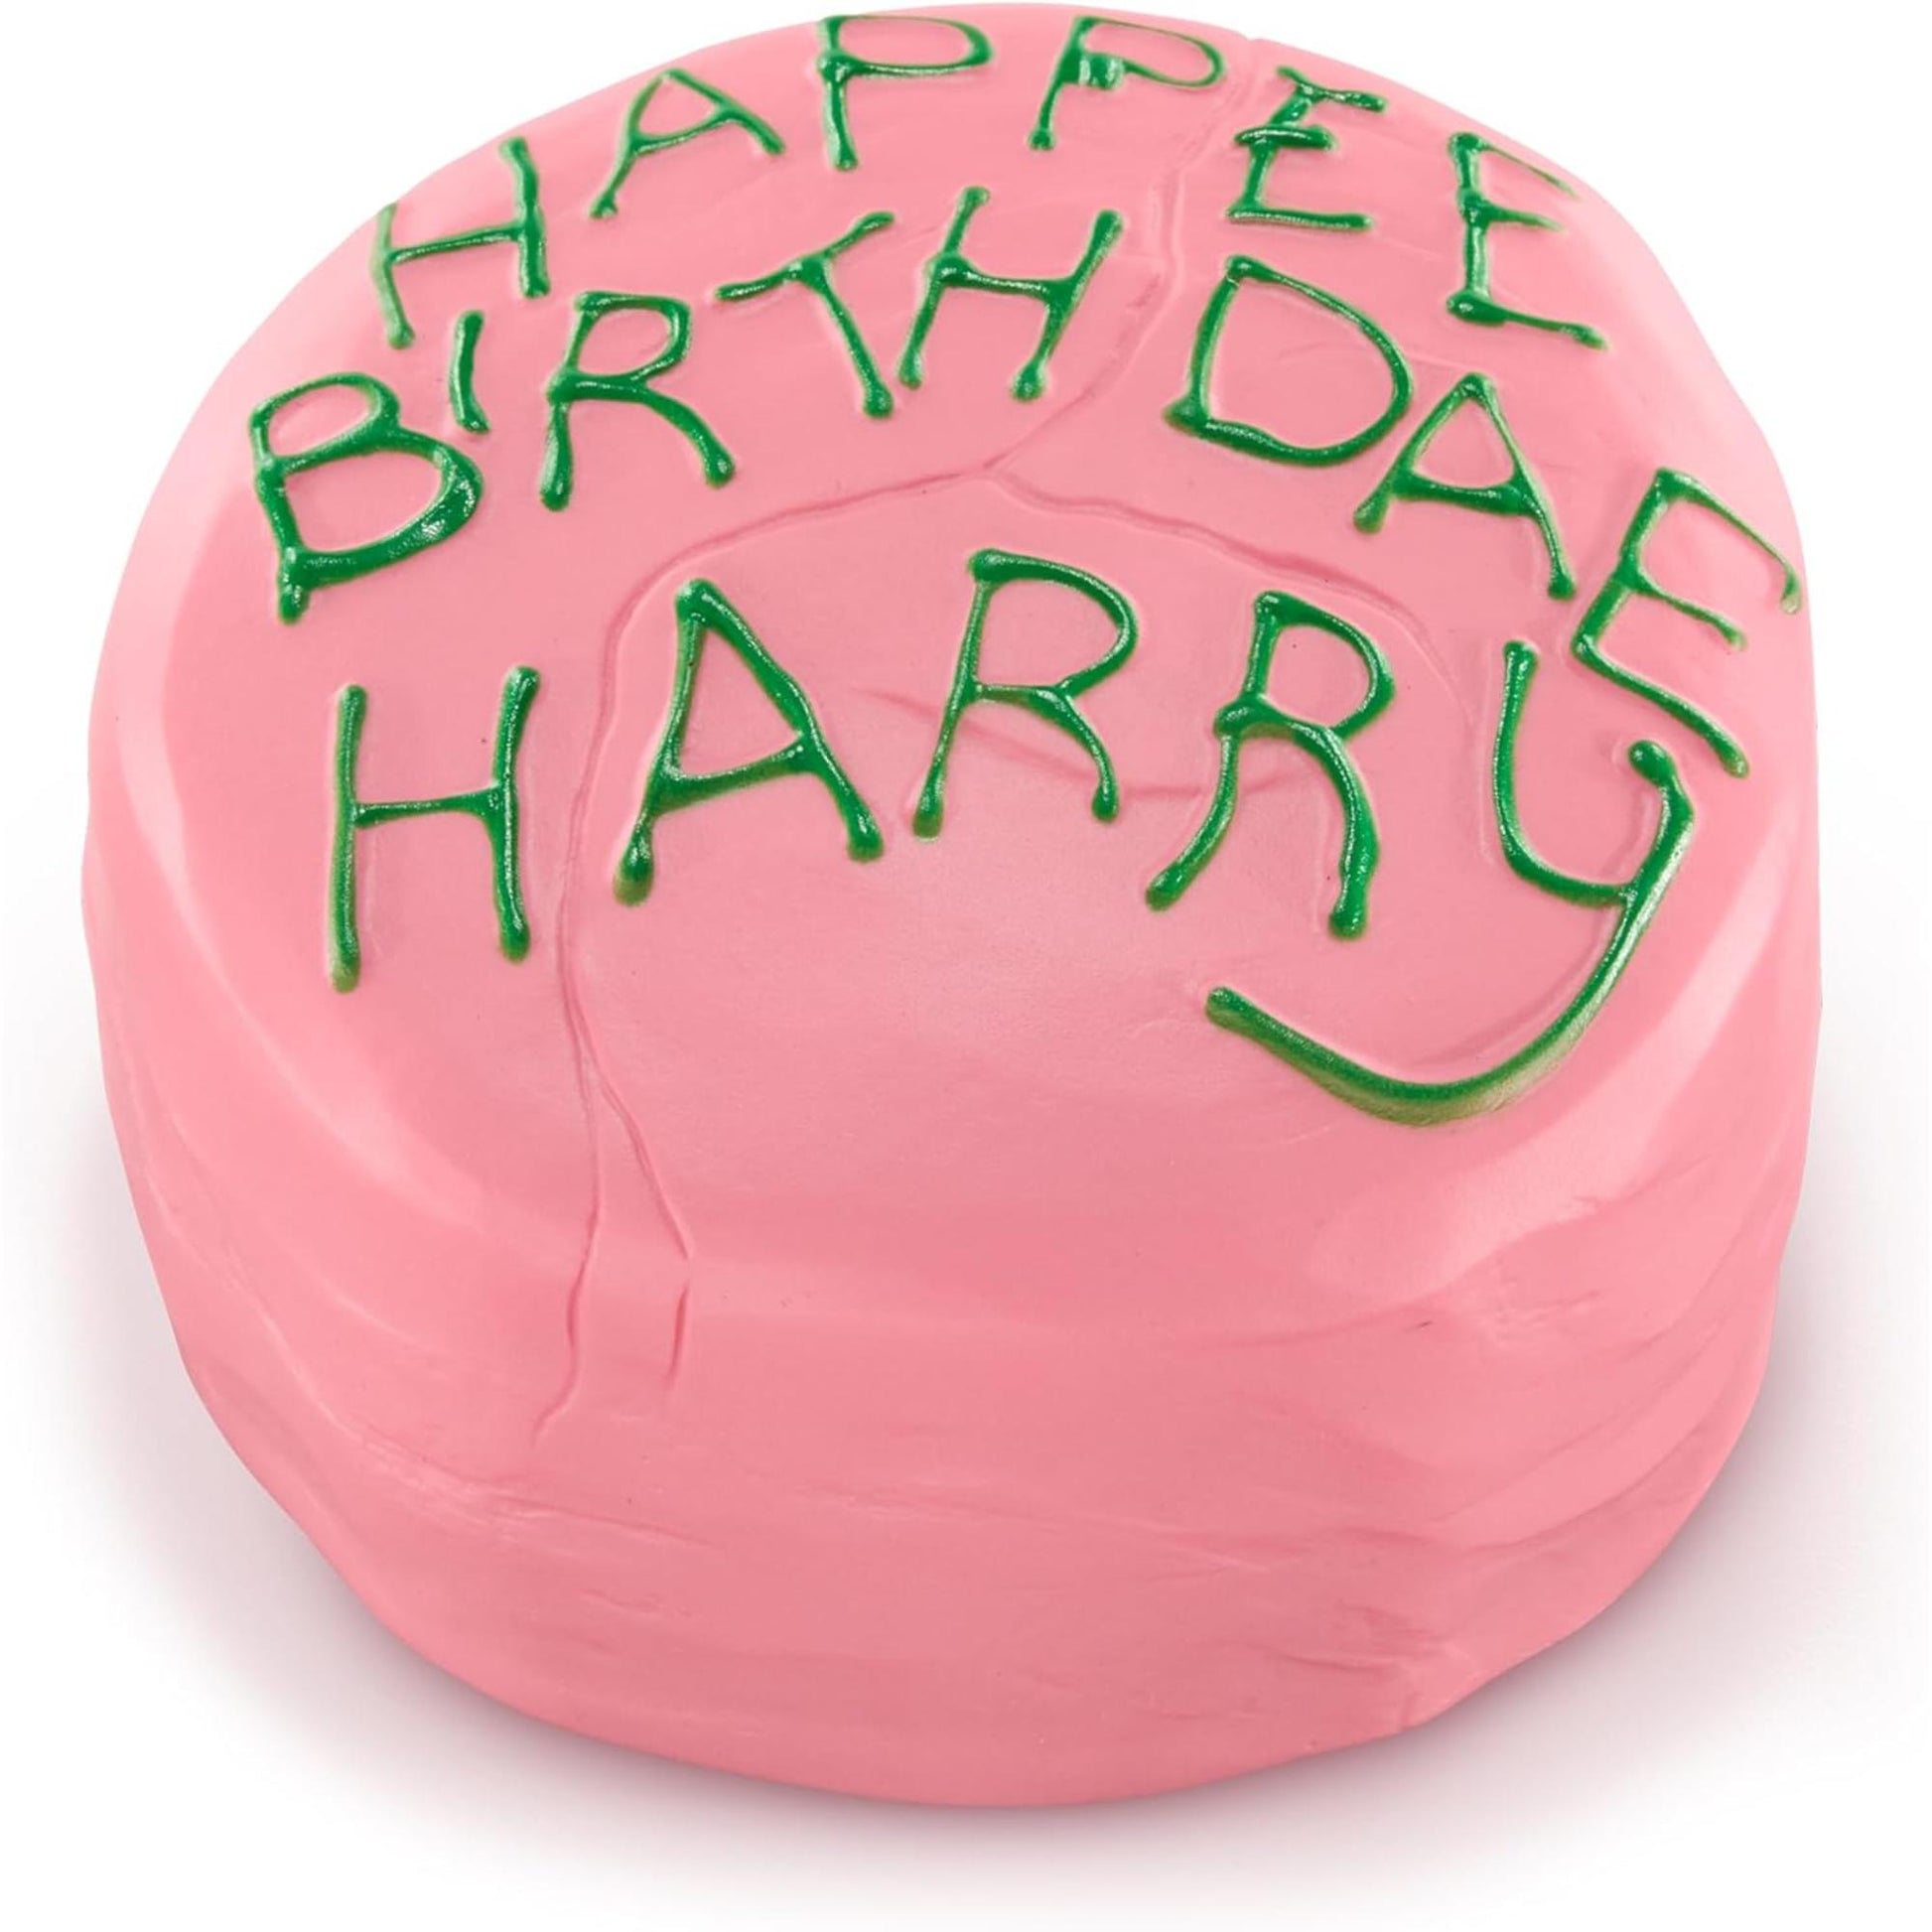 Harry&#39s Birthday Cake - Toyllectible Pufflums? - Harry Potter